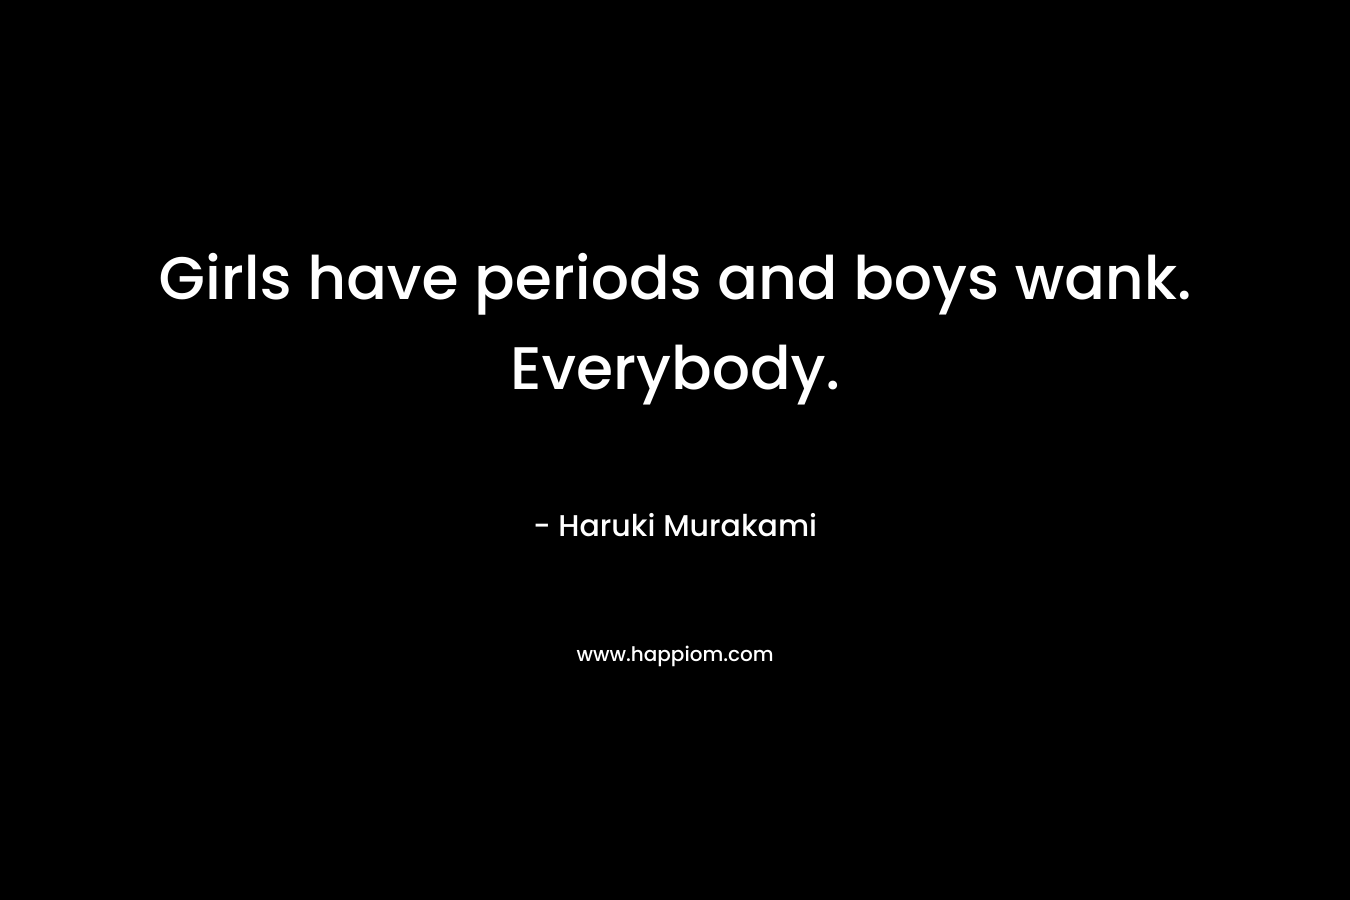 Girls have periods and boys wank. Everybody.